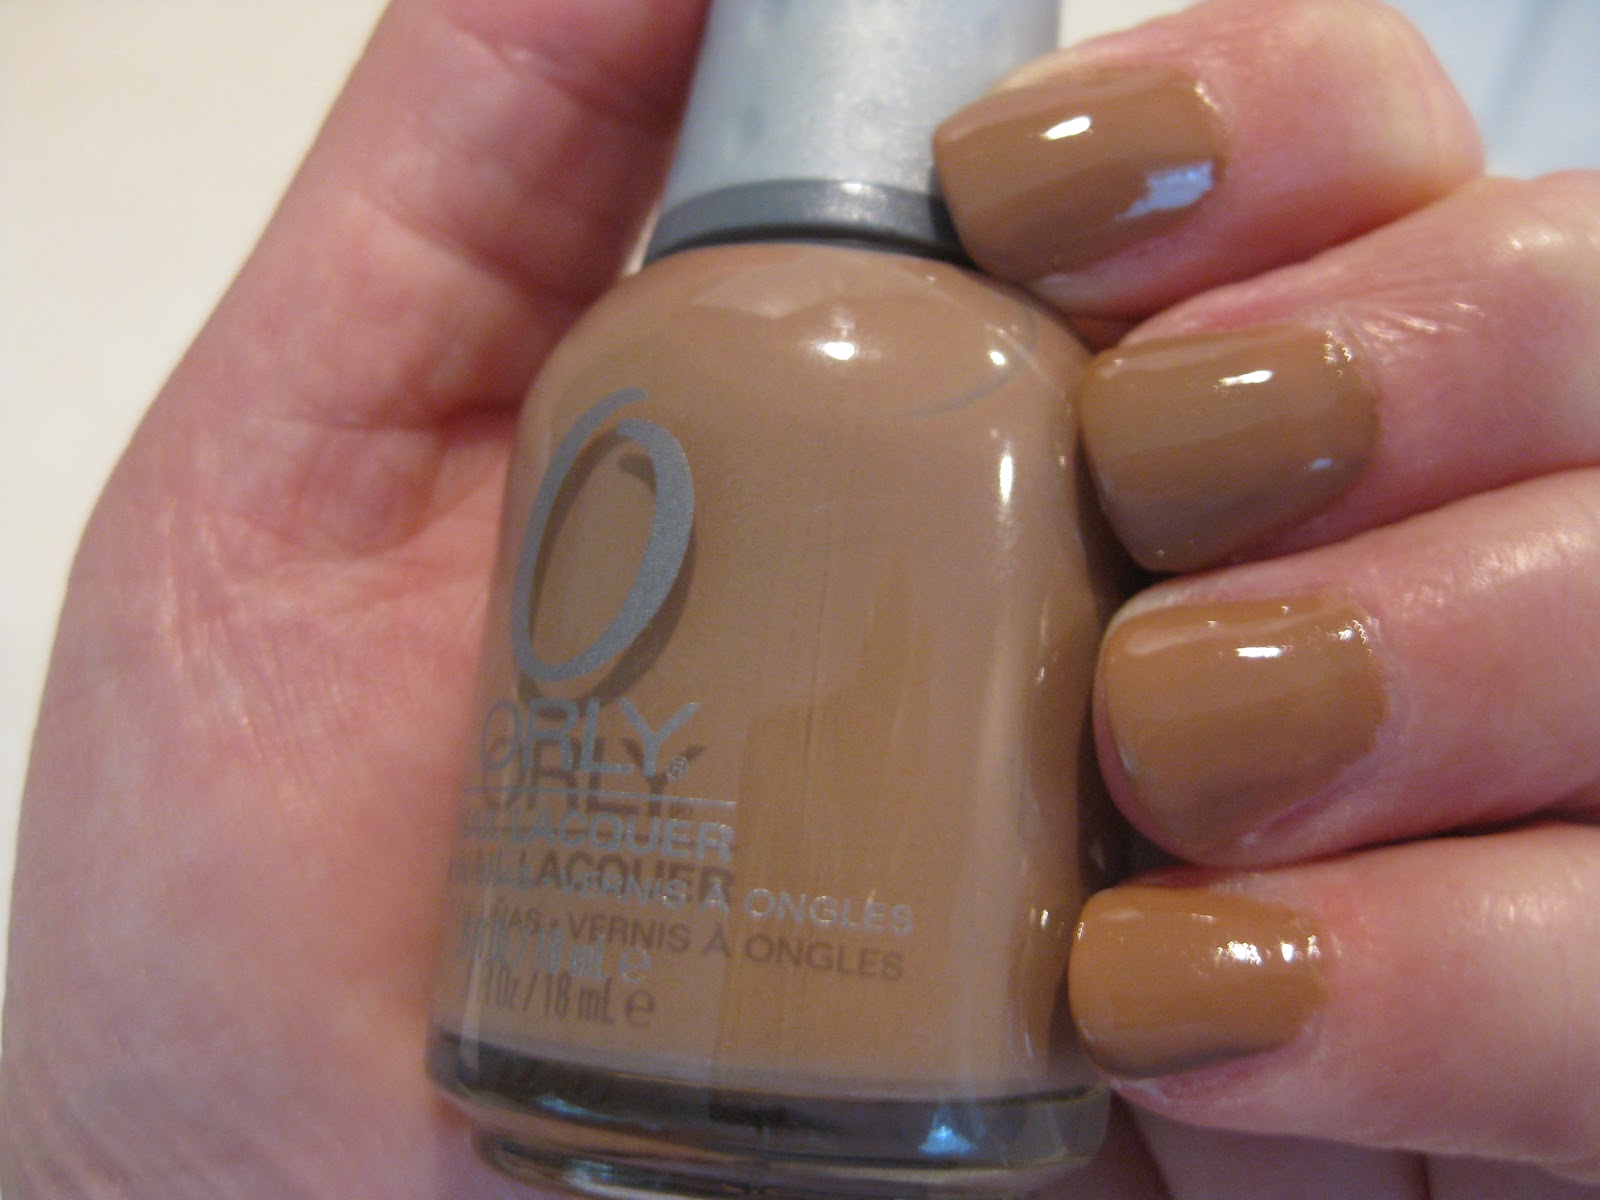 10. Orly Nail Lacquer in "Coffee Break" - wide 7